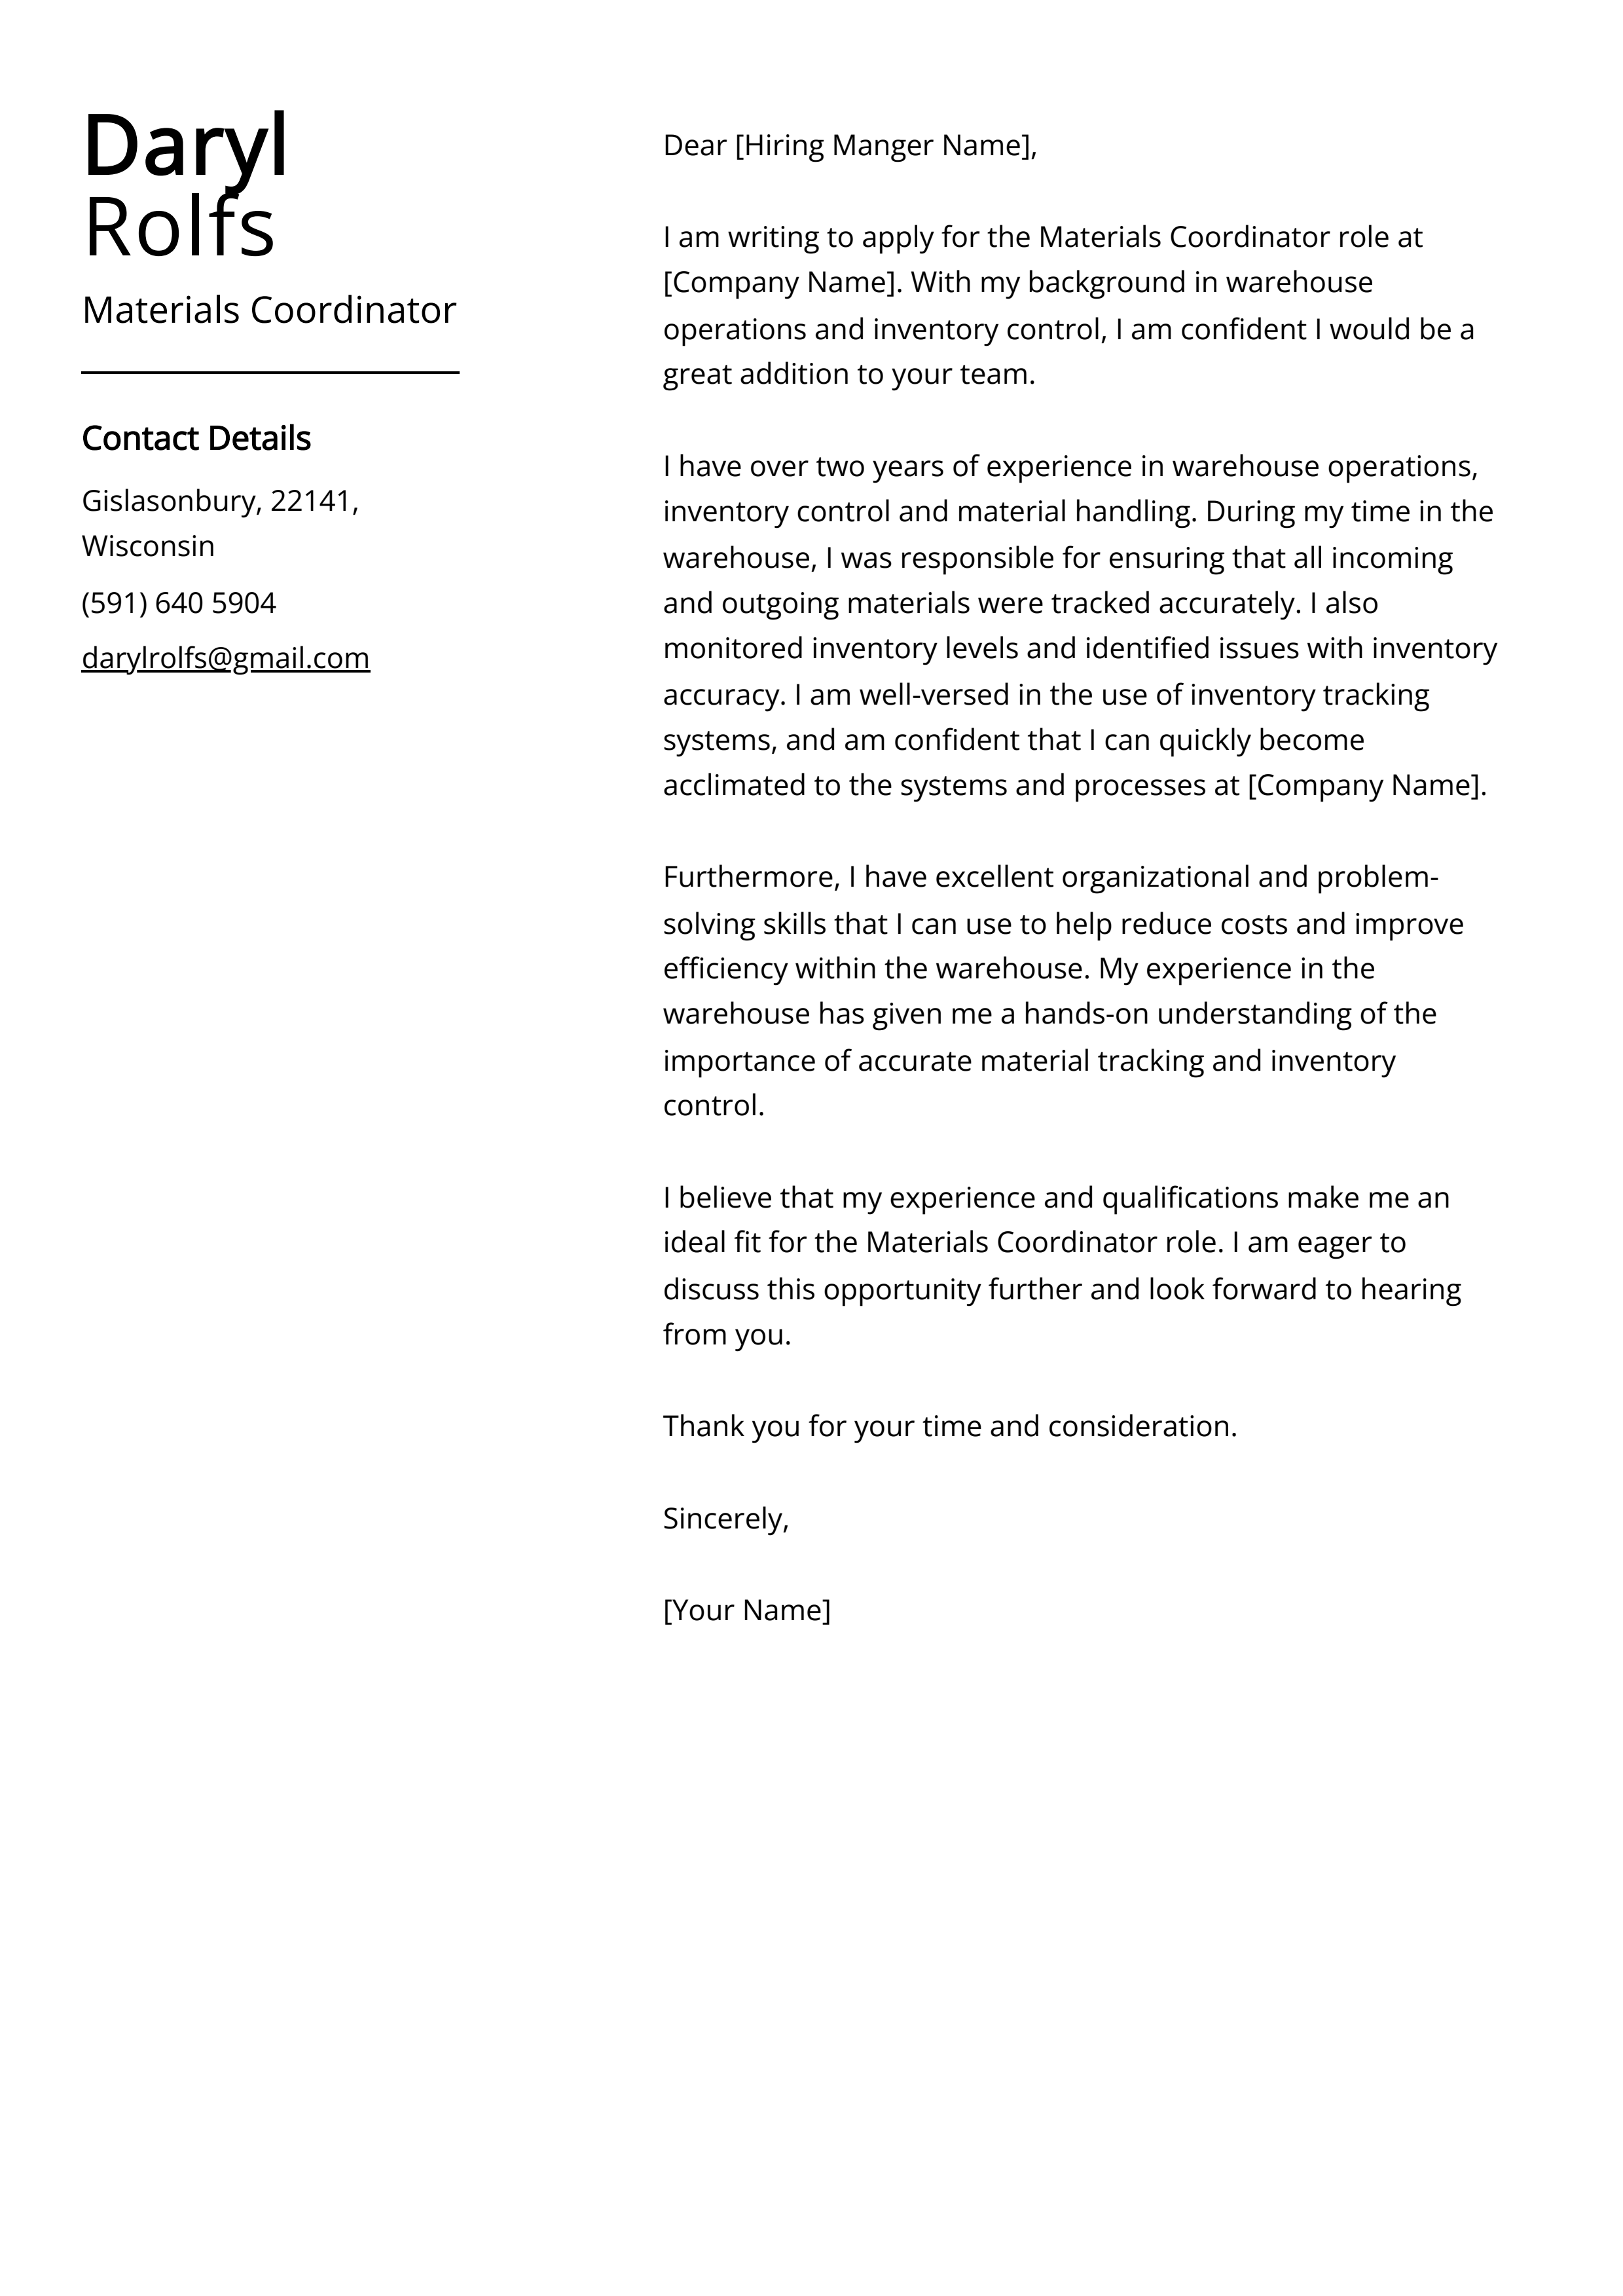 Materials Coordinator Cover Letter Example